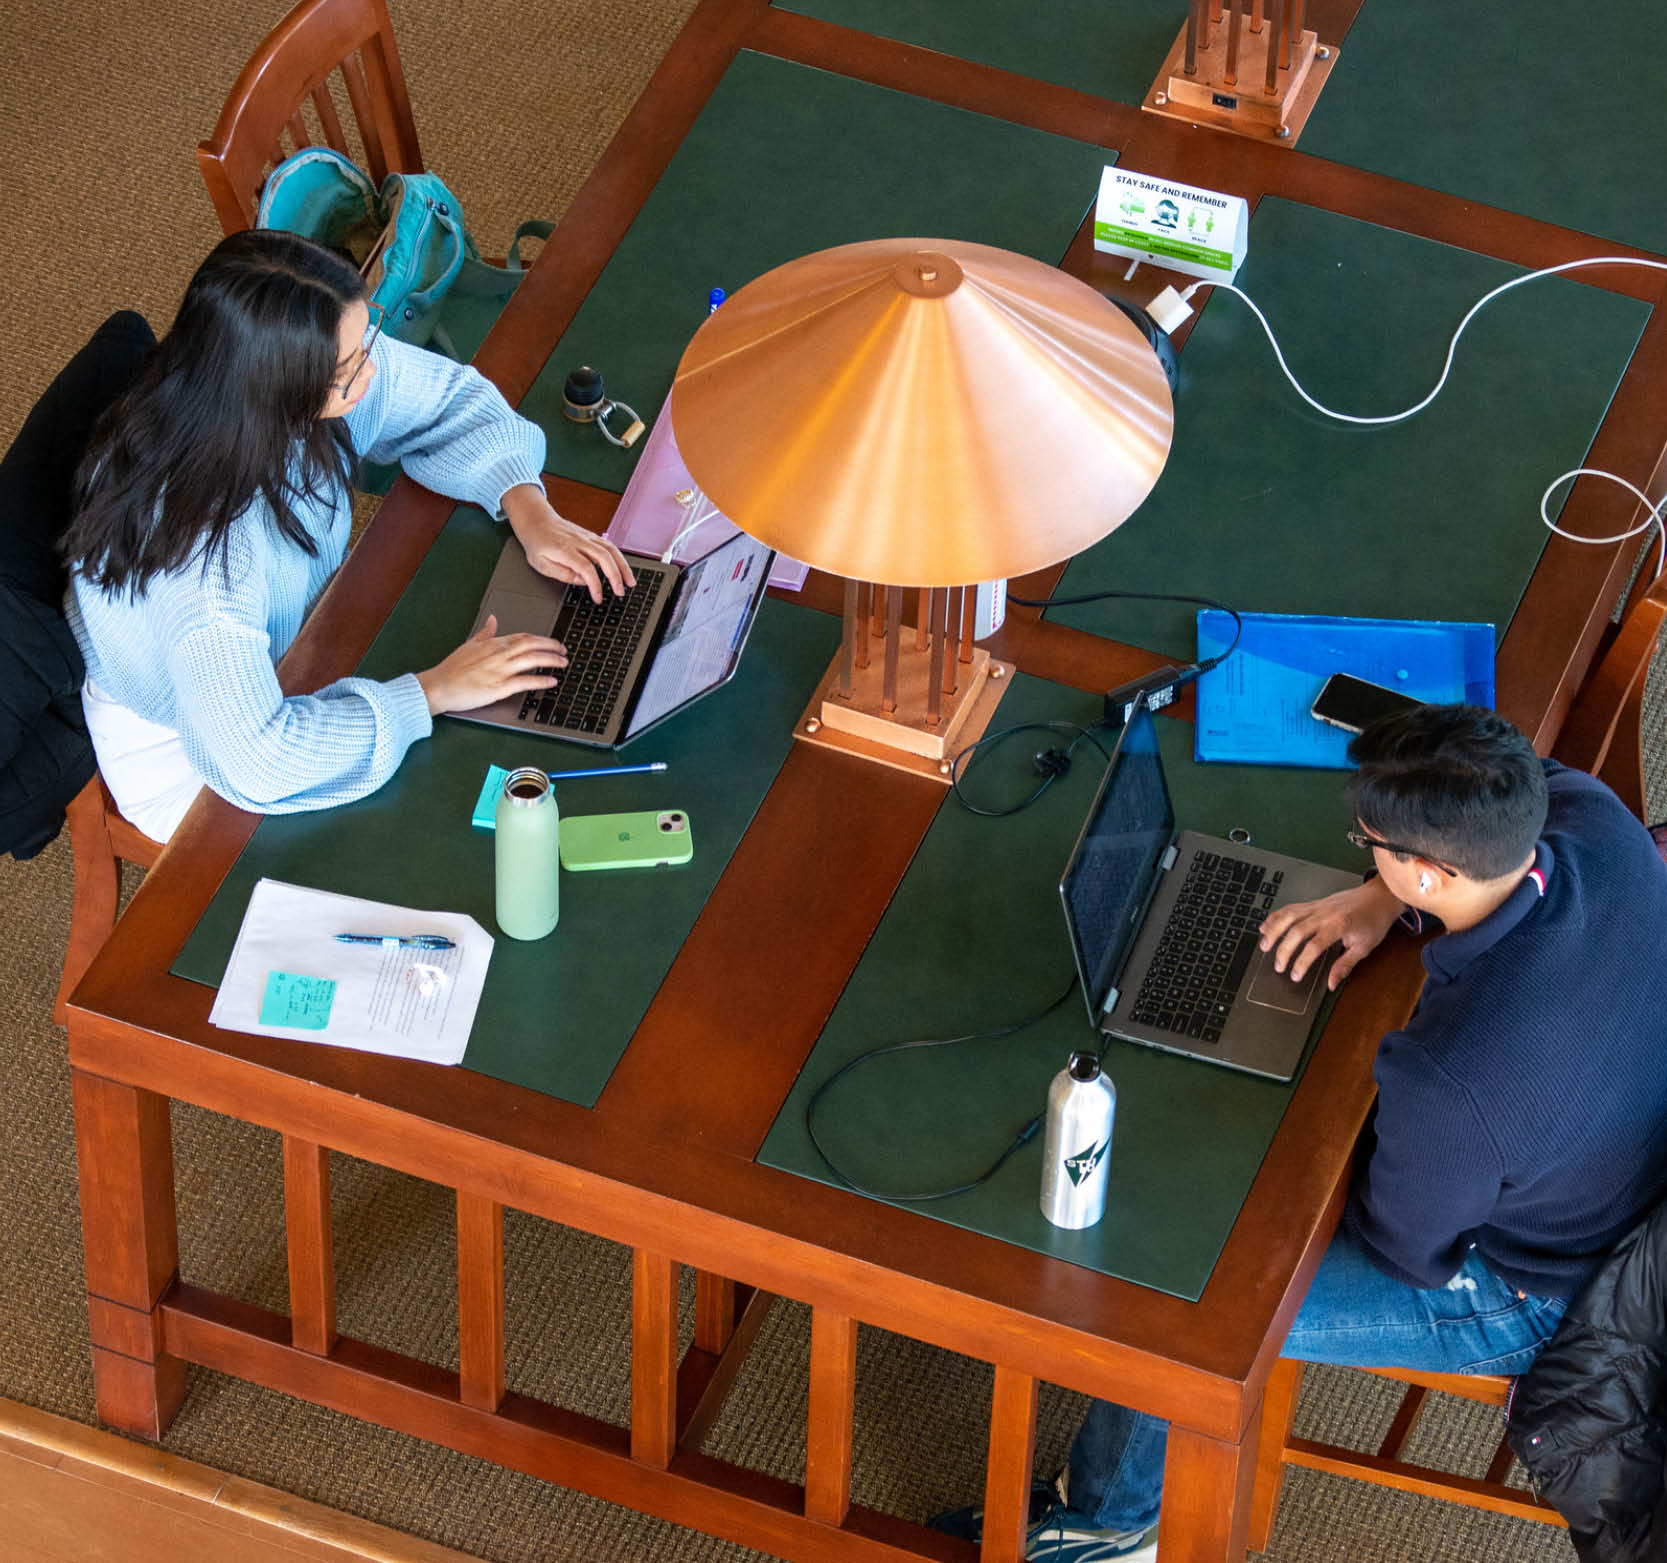 Students studying in the study hall.